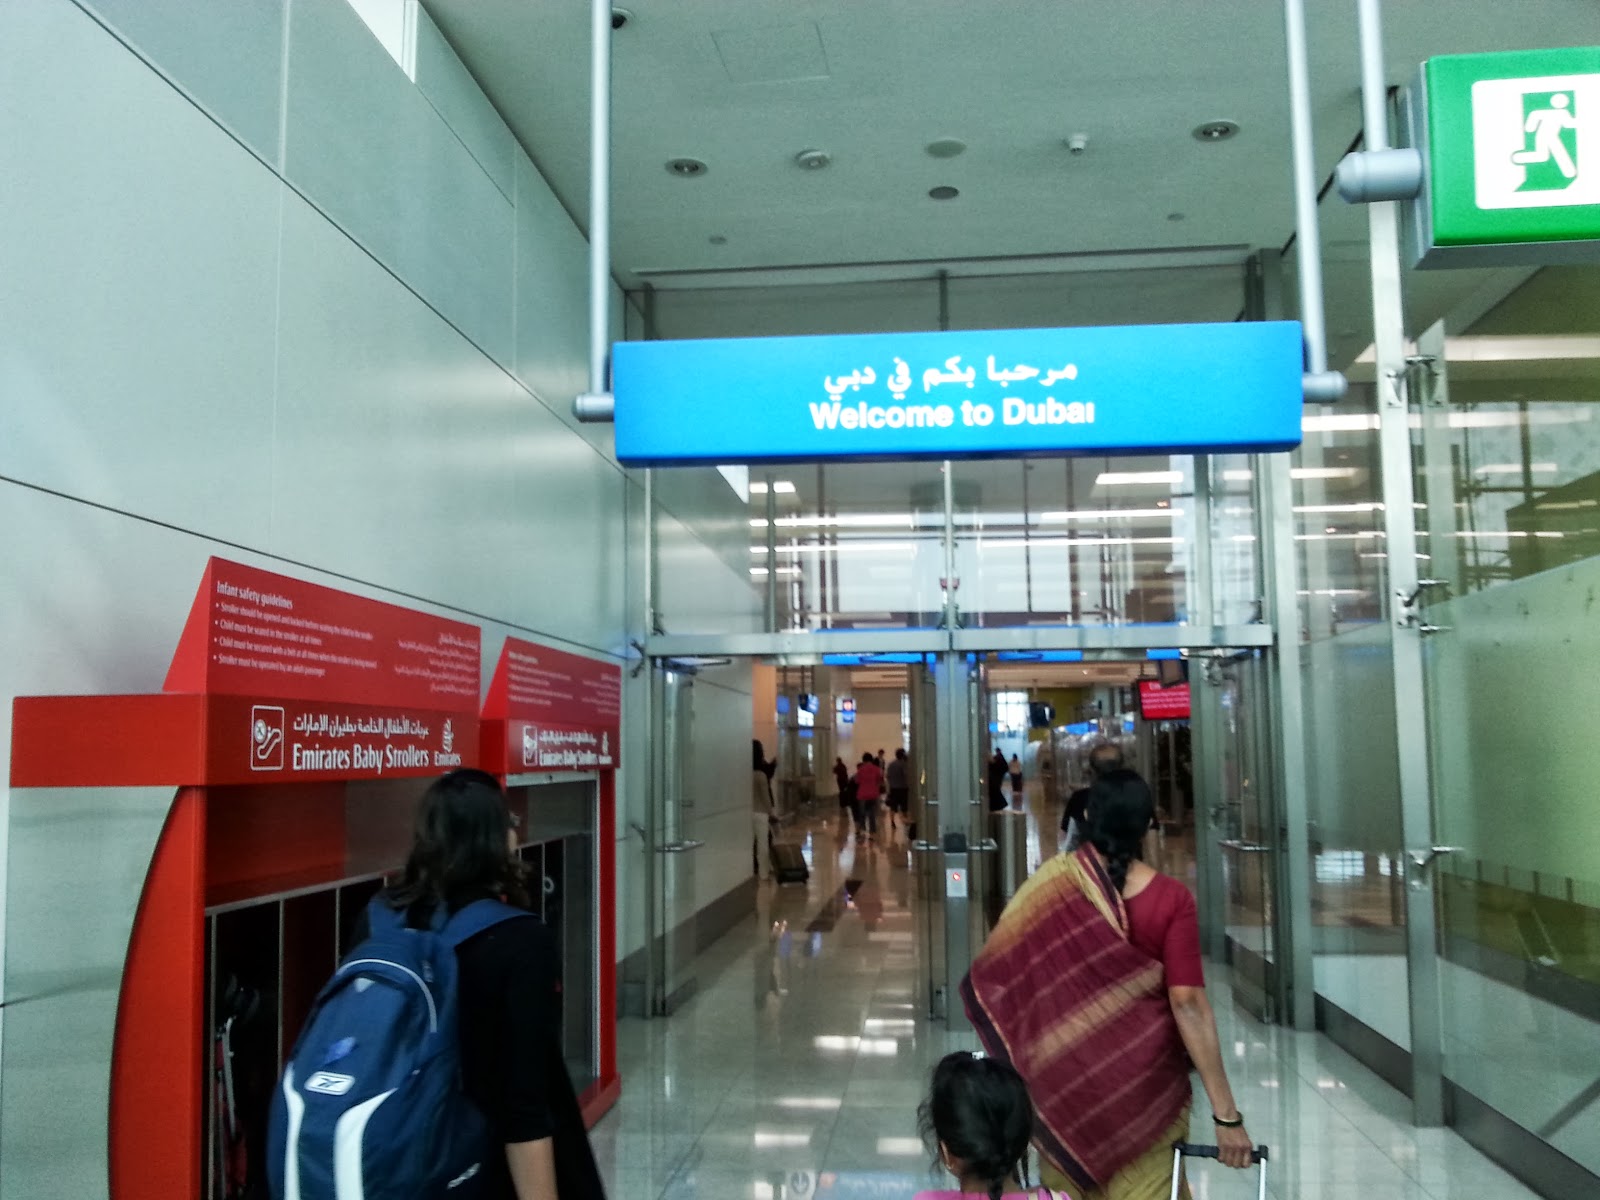 Leaving Tel Aviv: My Experience Through Airport Security at Ben Gurion